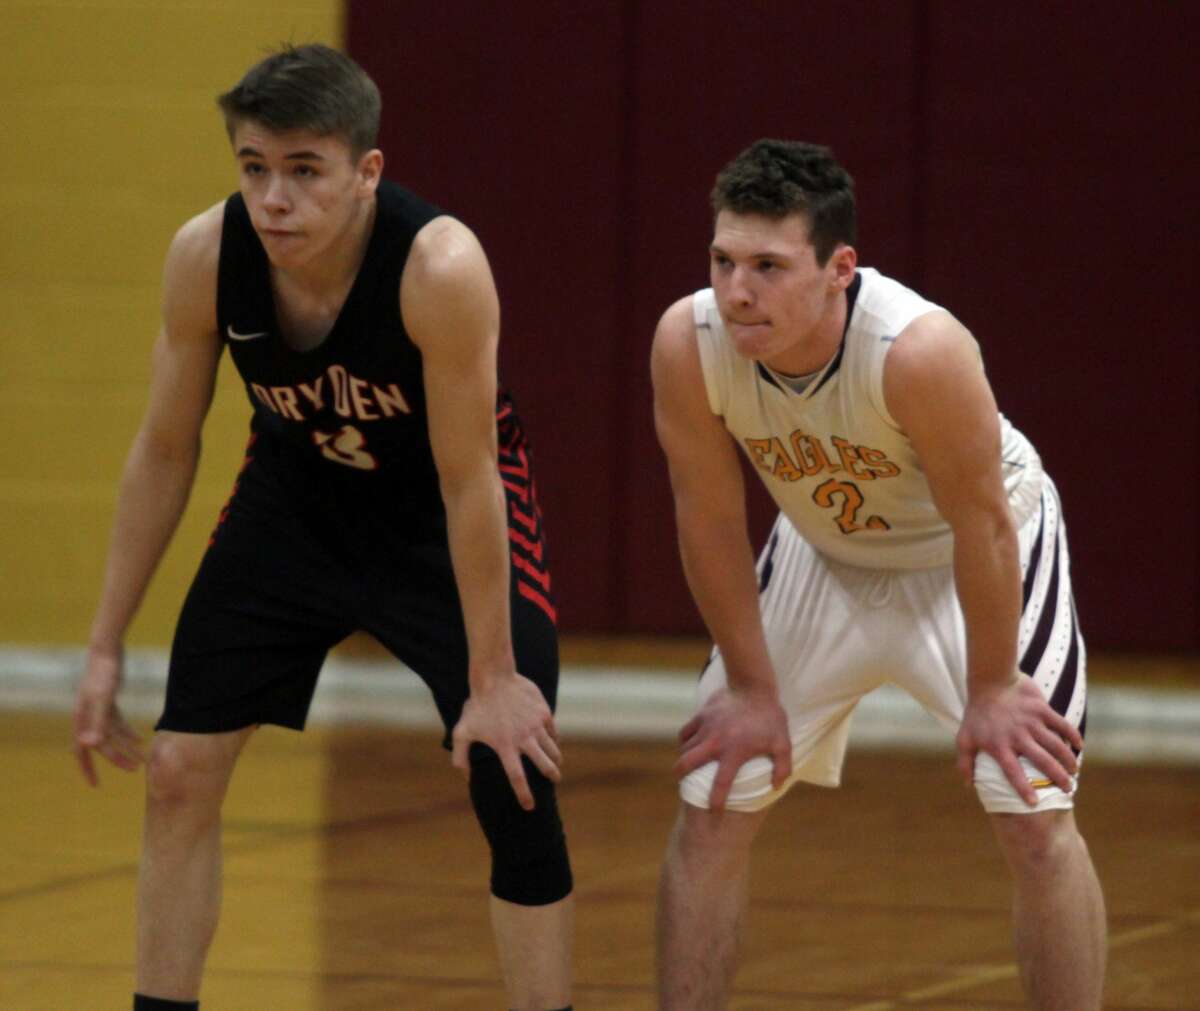 The Deckerville boys basketball team lost to Dryden by a score of 72-46 on Tuesday, Feb. 18.